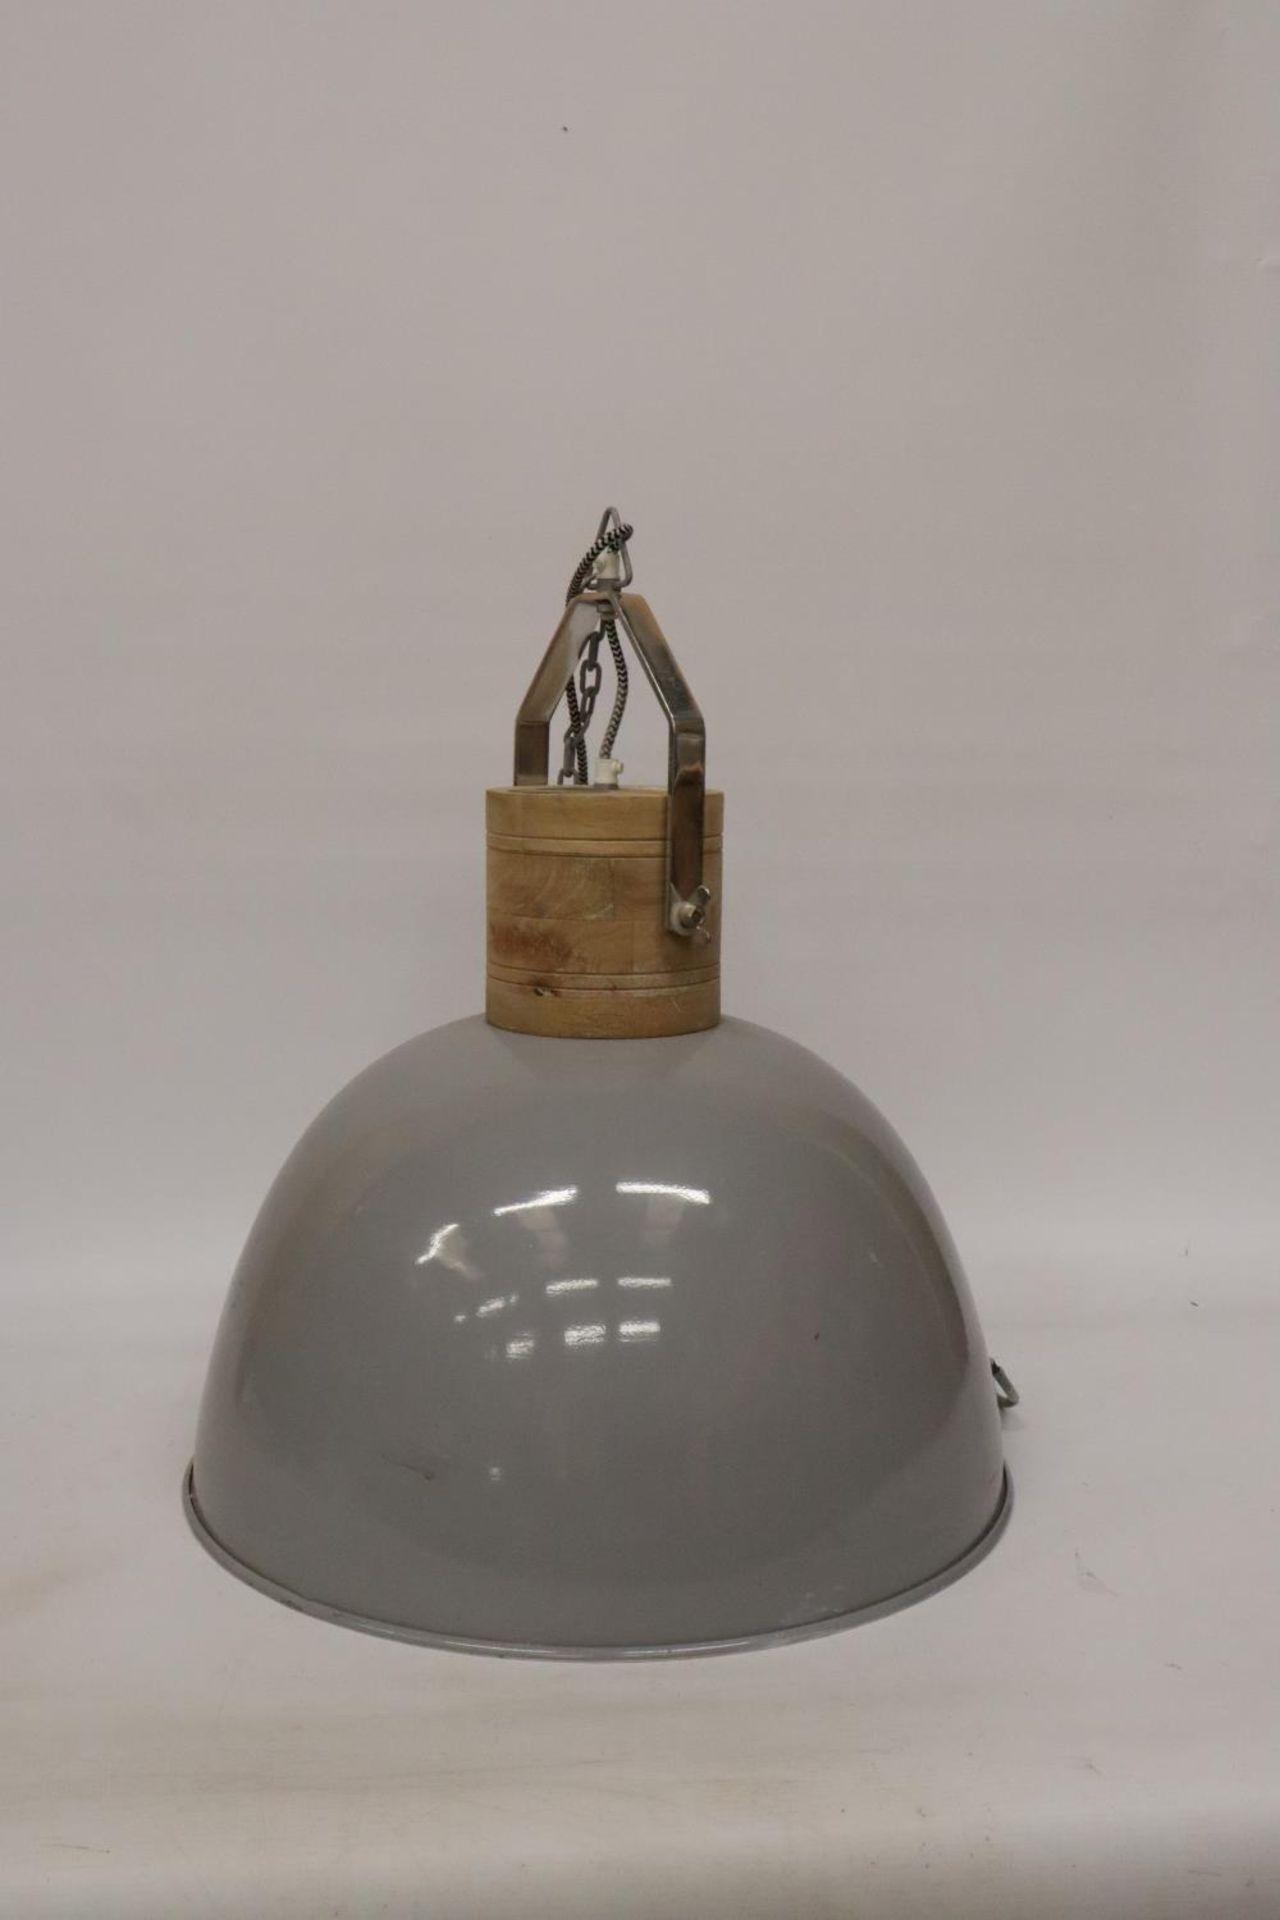 A RETRO STYLE LIBRA INDUSTRIAL GREY ENAMEL LIGHT FITTING - Image 2 of 5